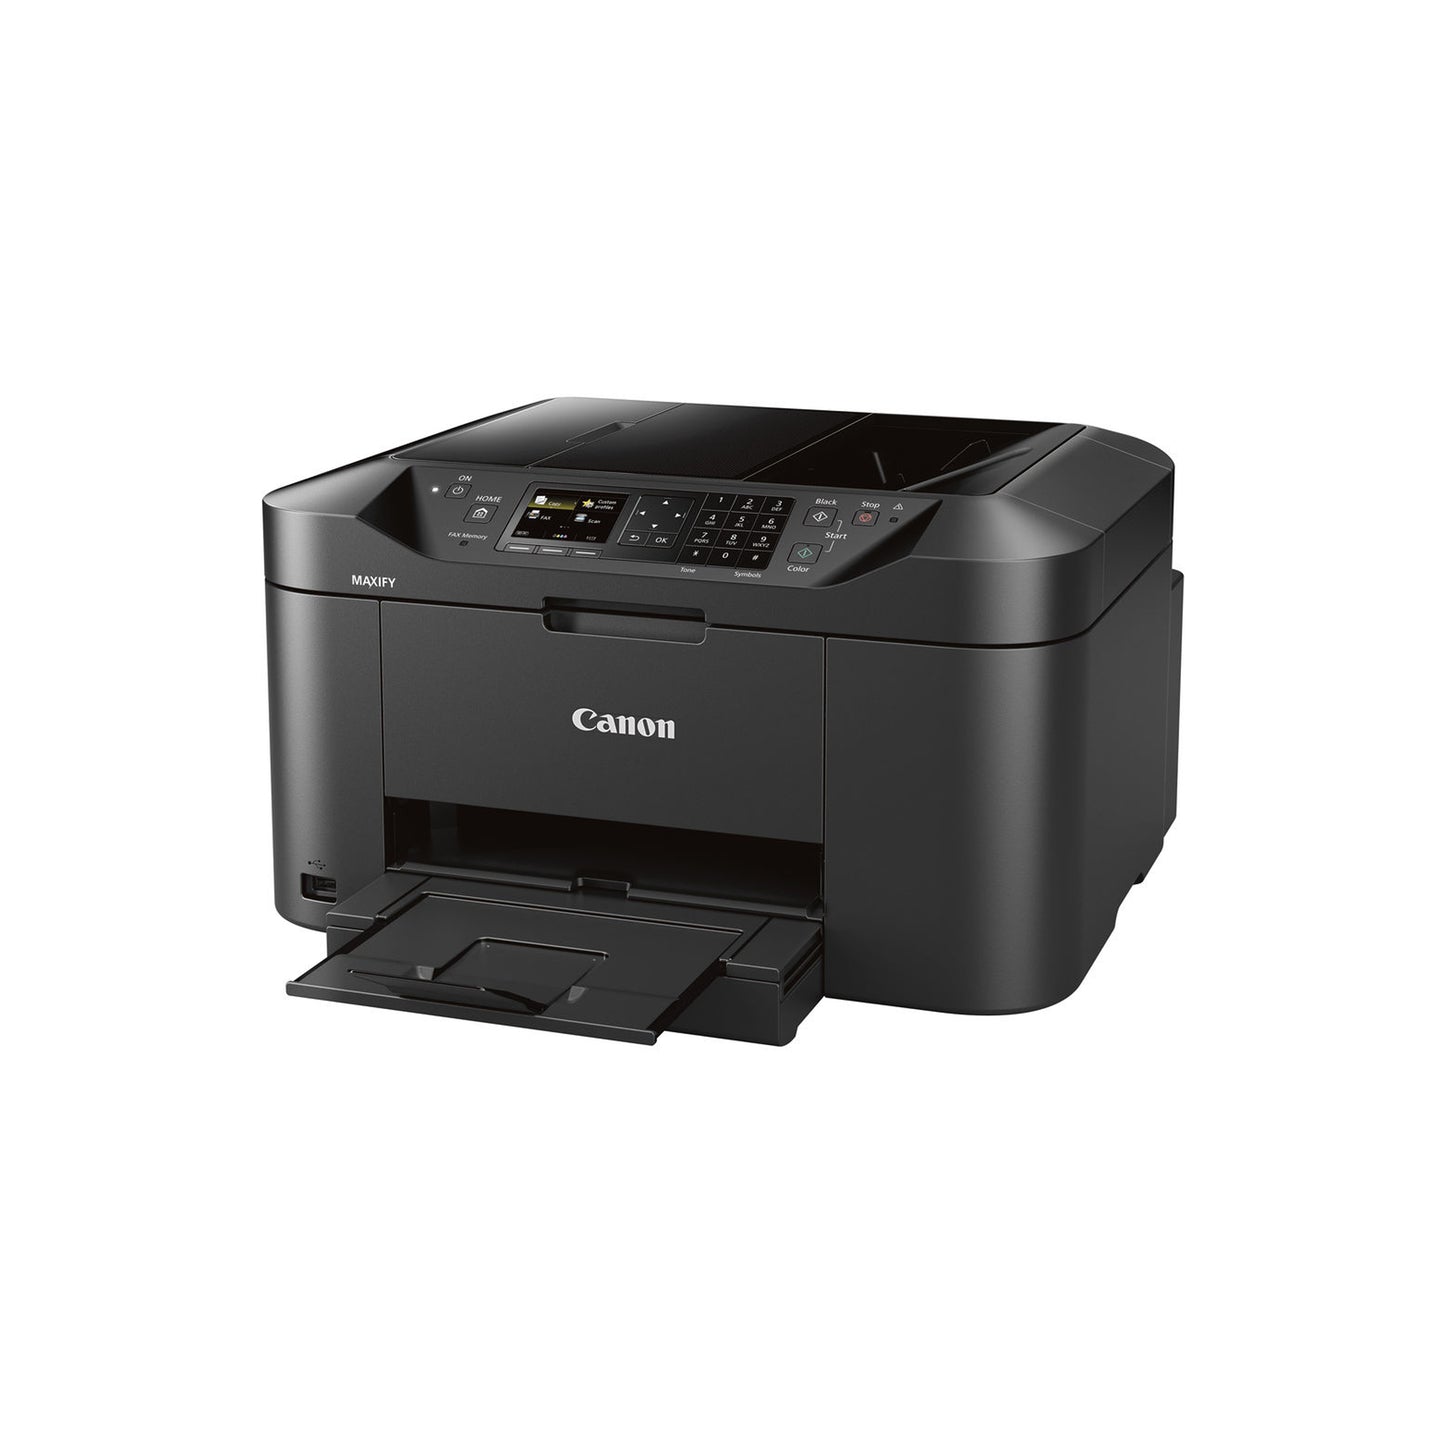 Canon Office Products MAXIFY MB2120 Wireless Color Photo Printer with Scanner, Copier and Fax